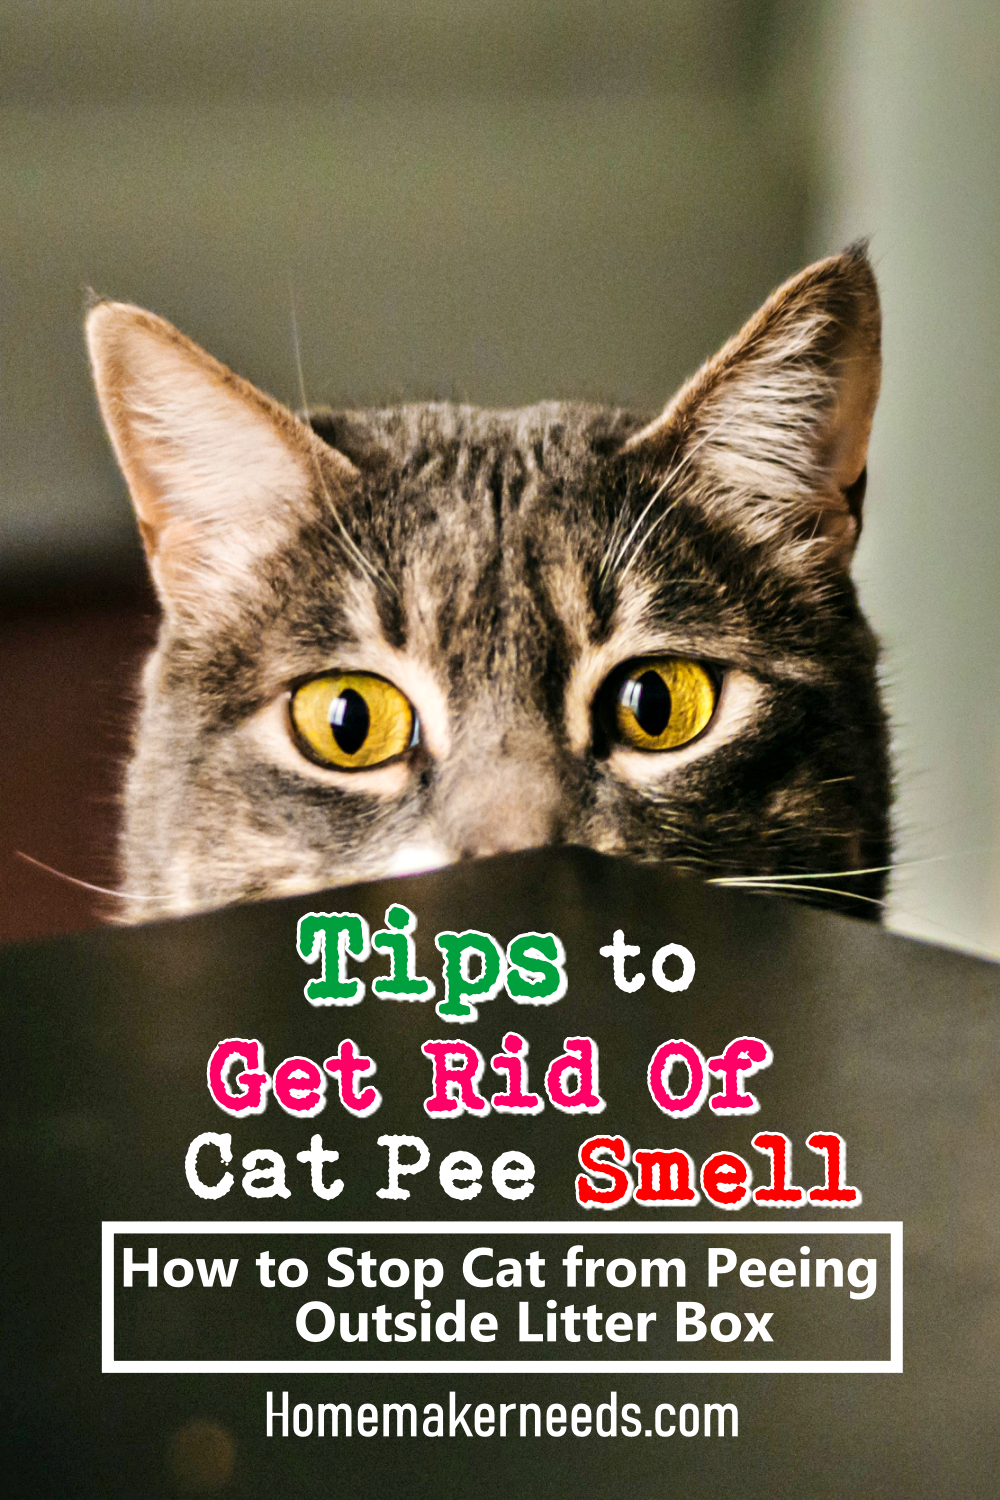 Tips To Get Rid Of Cat Pee Smell! in 2020